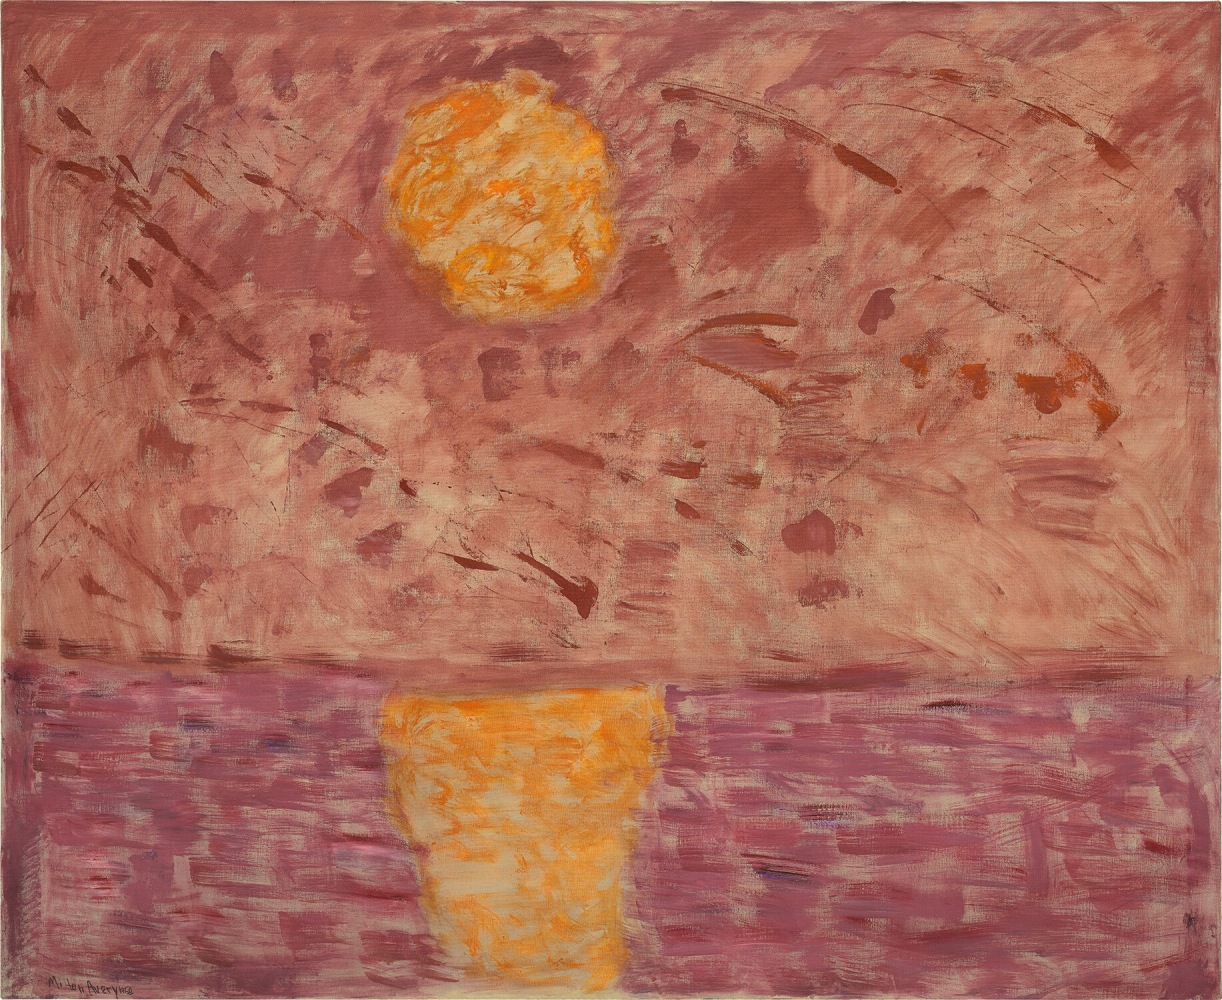 Hot Moon

1958

Oil on canvas

54 x 66 1/8 inches

137.2 x 168cm